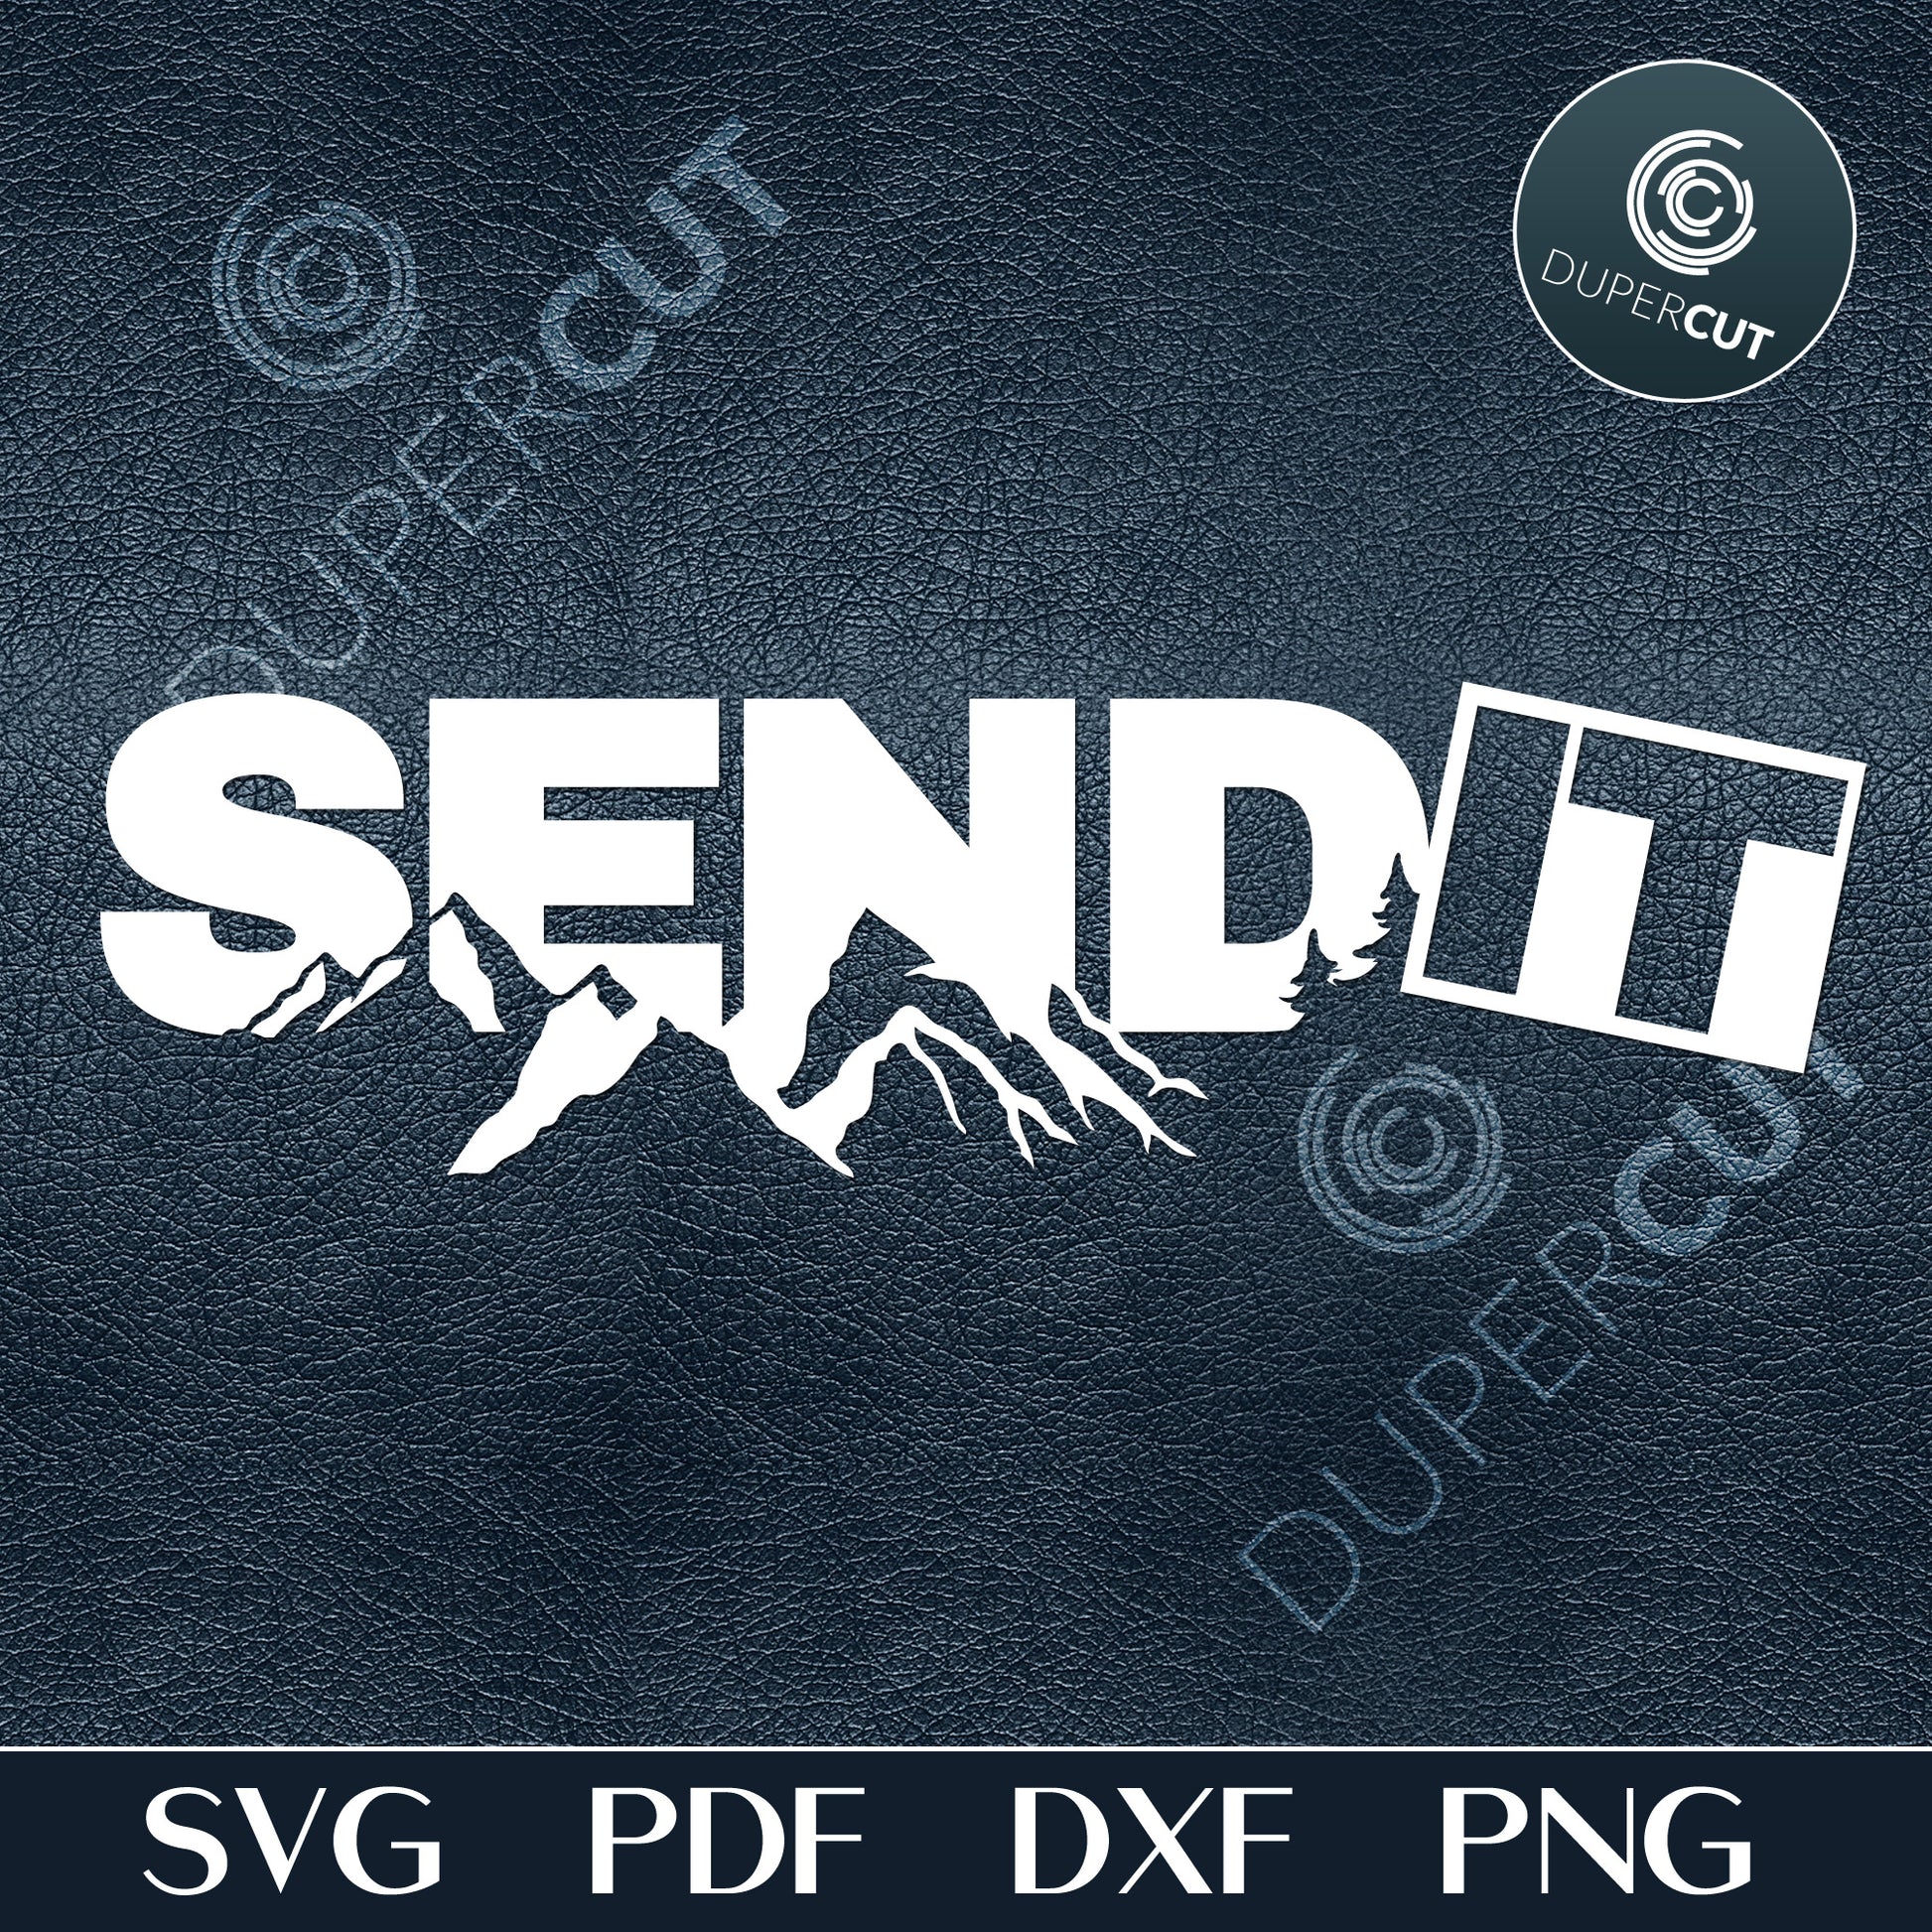 Send it - custom design with mountains, outdoor adventure vinyl. SVG PNG DXF cutting files for Cricut, Silhouette, Glowforge, print on demand, sublimation templates